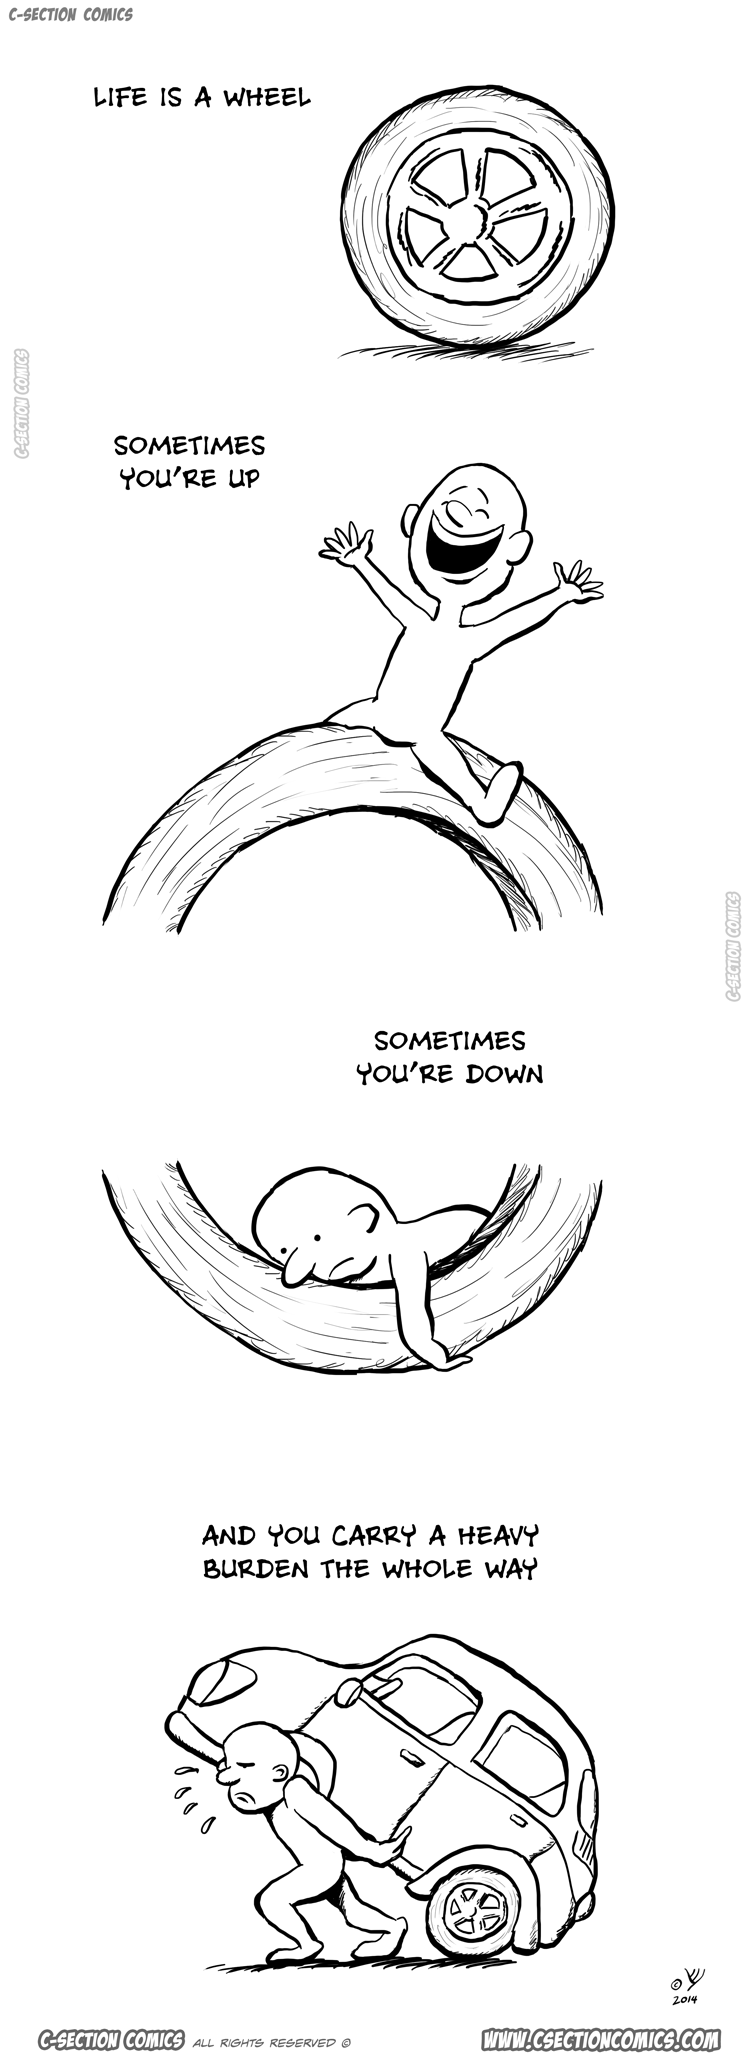 Life Is a Wheel - a motivation cartoon by C-Section Comics